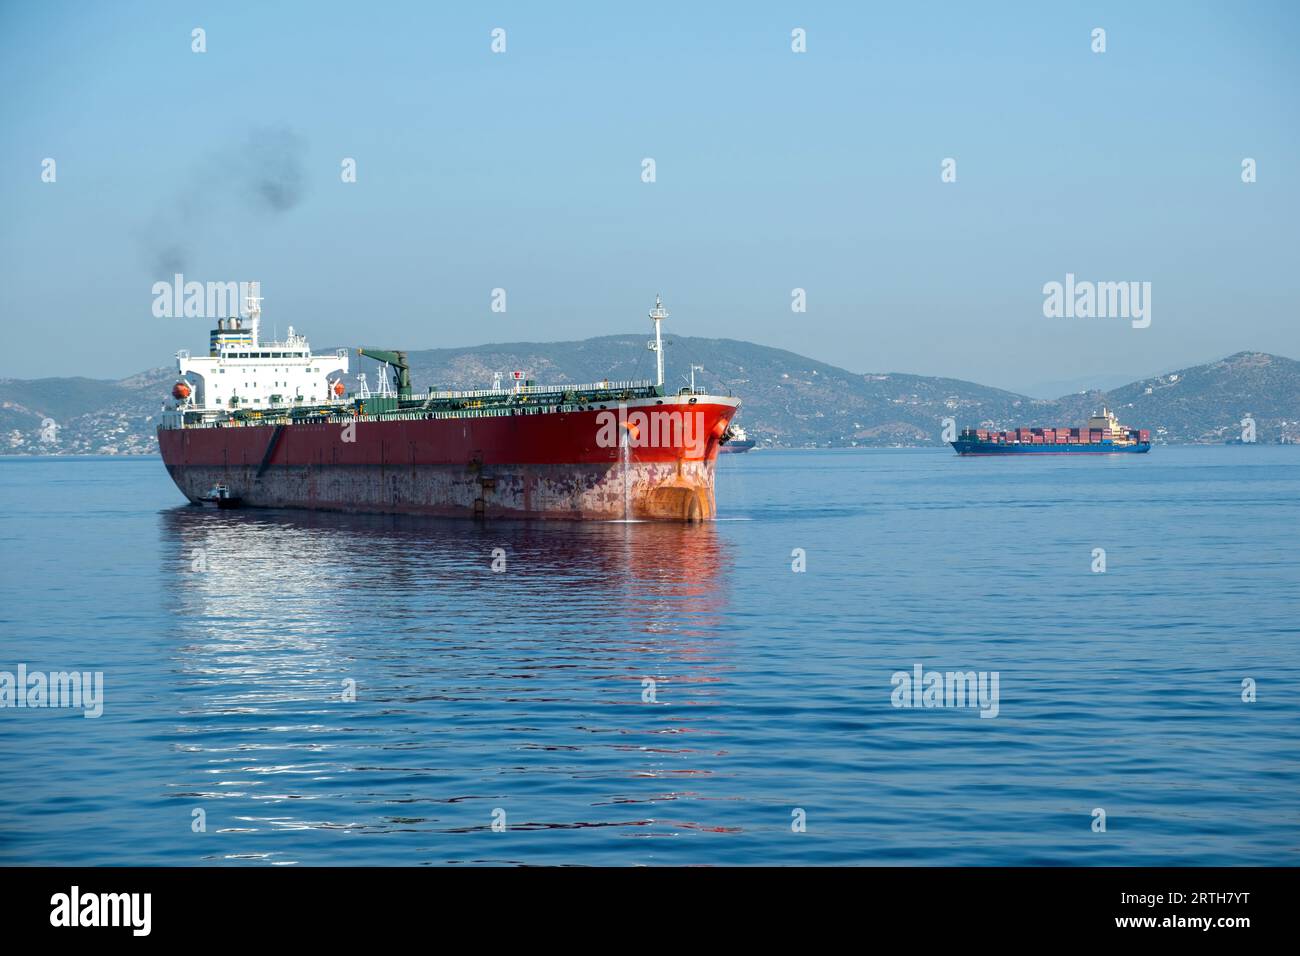 Container cargo ship loaded leaves Piraeus port, Greece. Import export business and logistics. Smoke from ship chimney, sea, blue sky background. Stock Photo